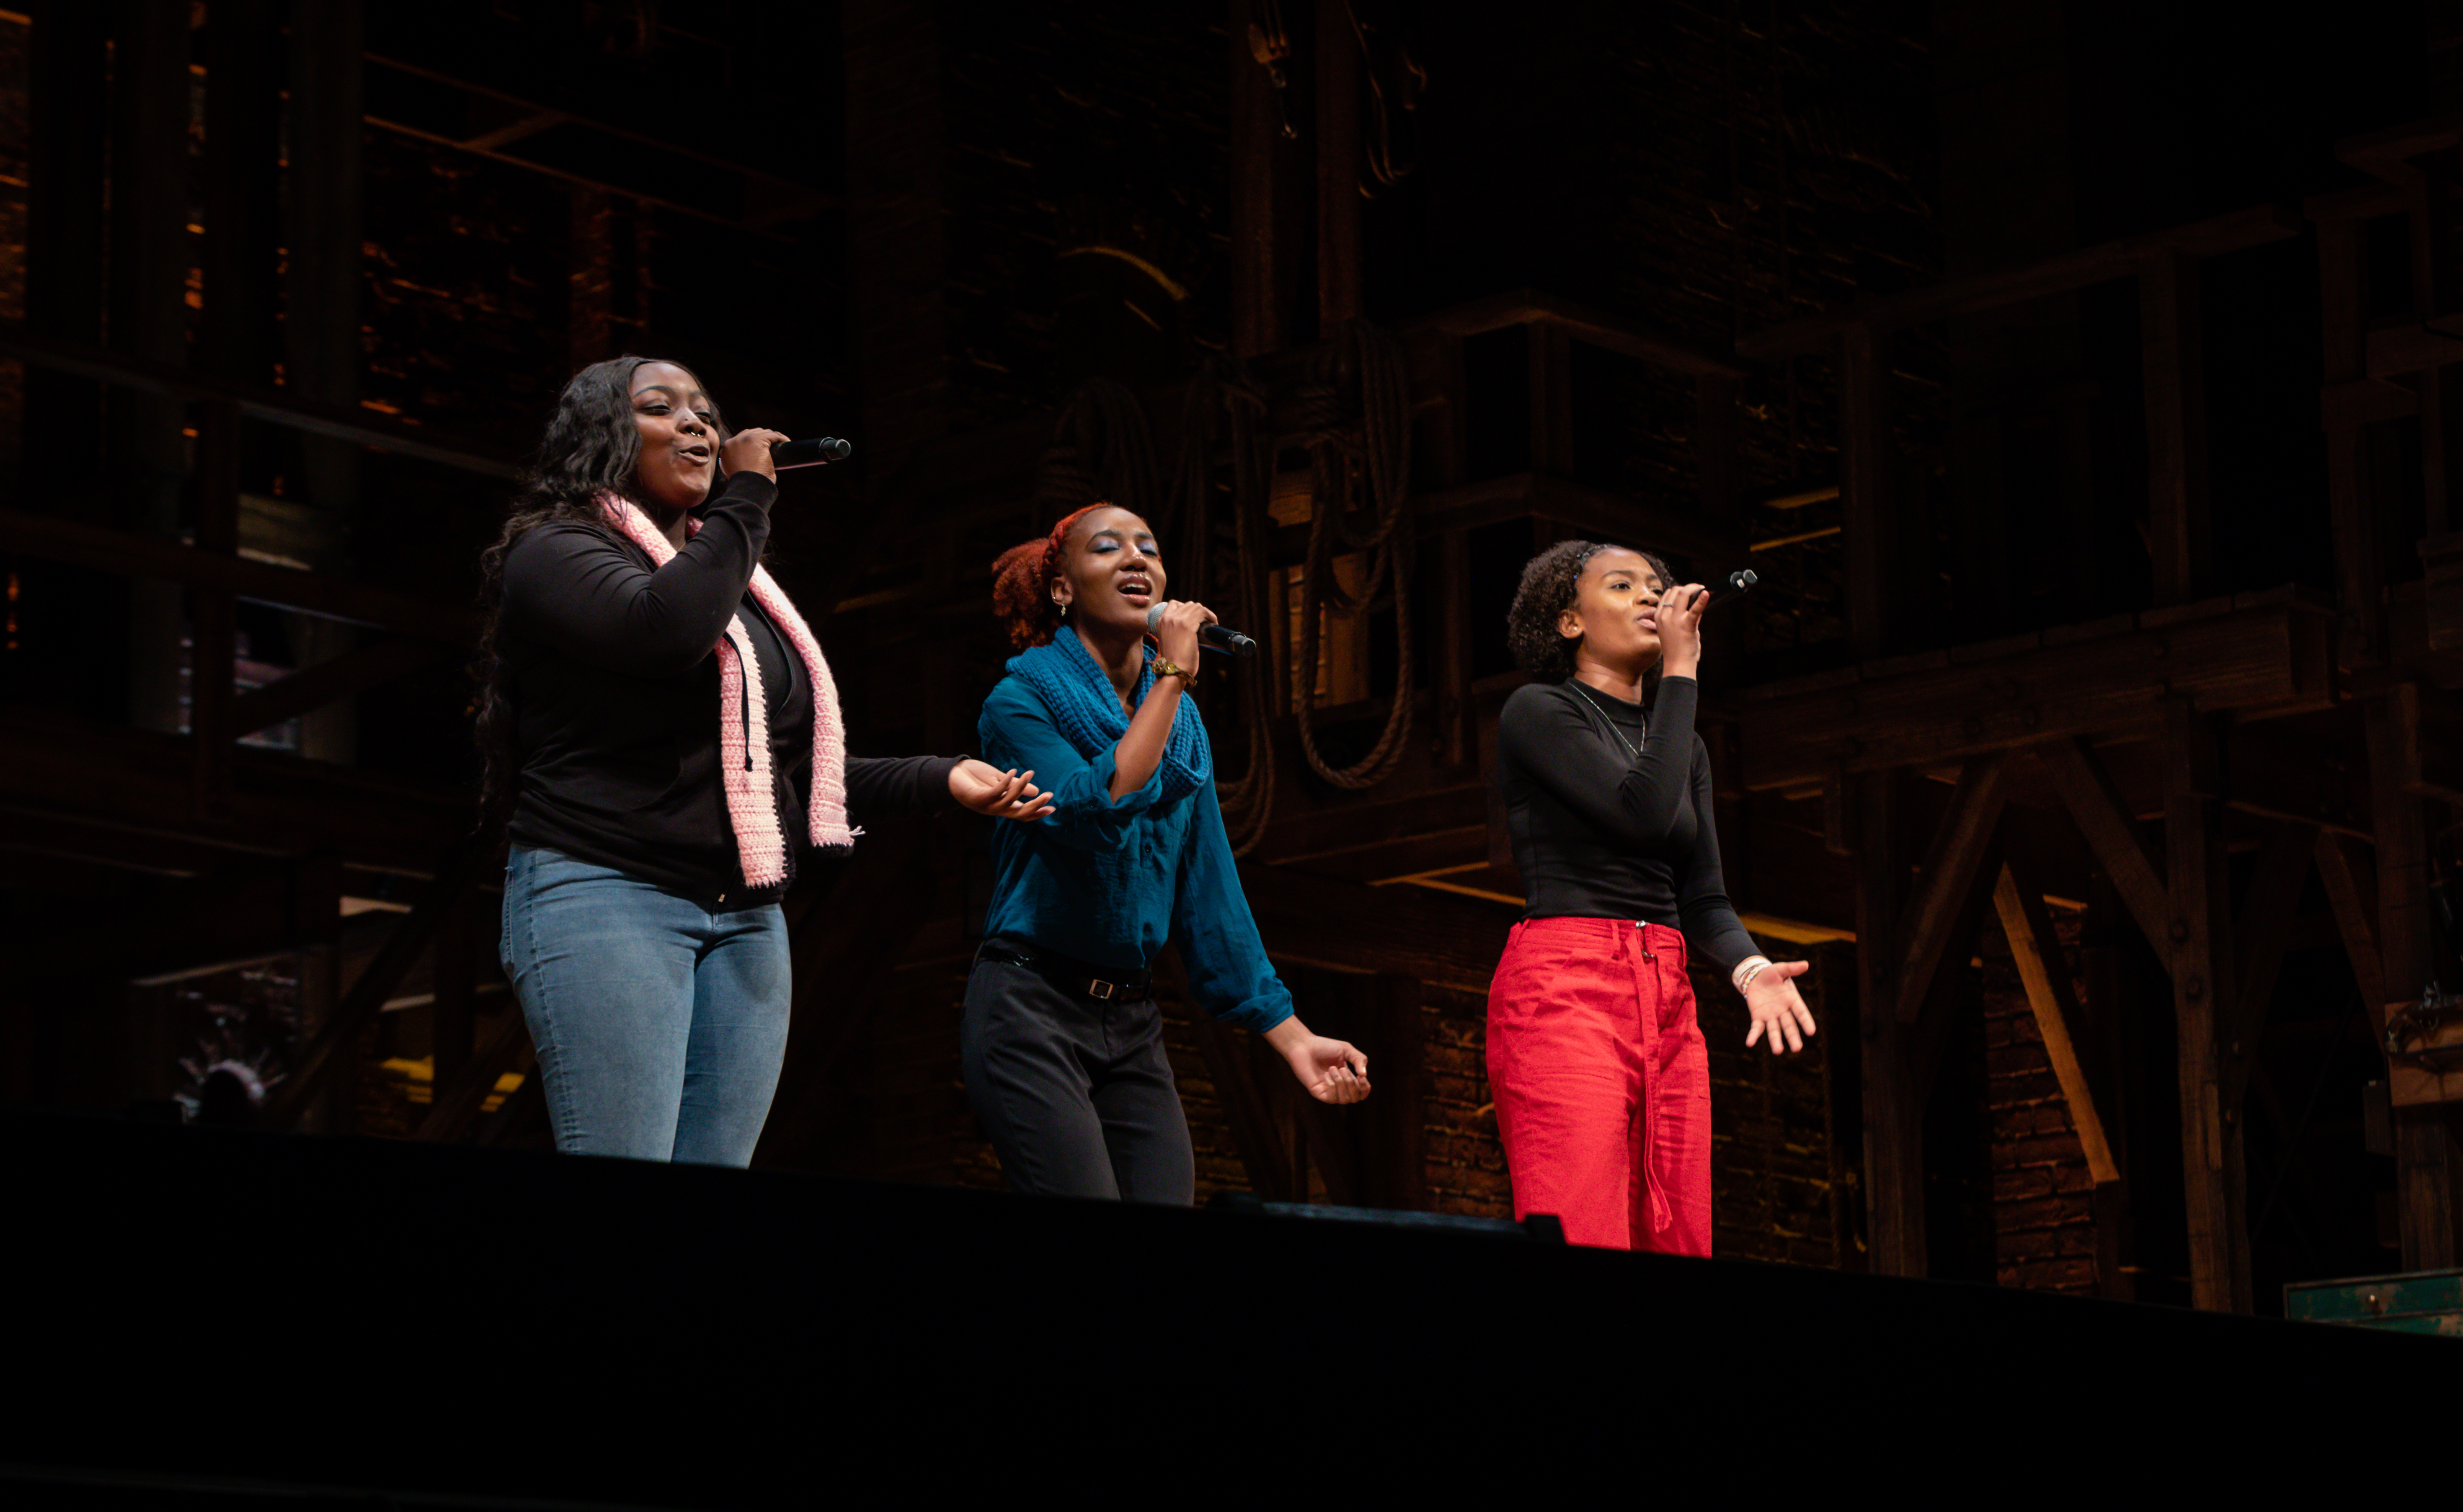 Student performers at an EduHam performance in San Francisco on March 4, 2020